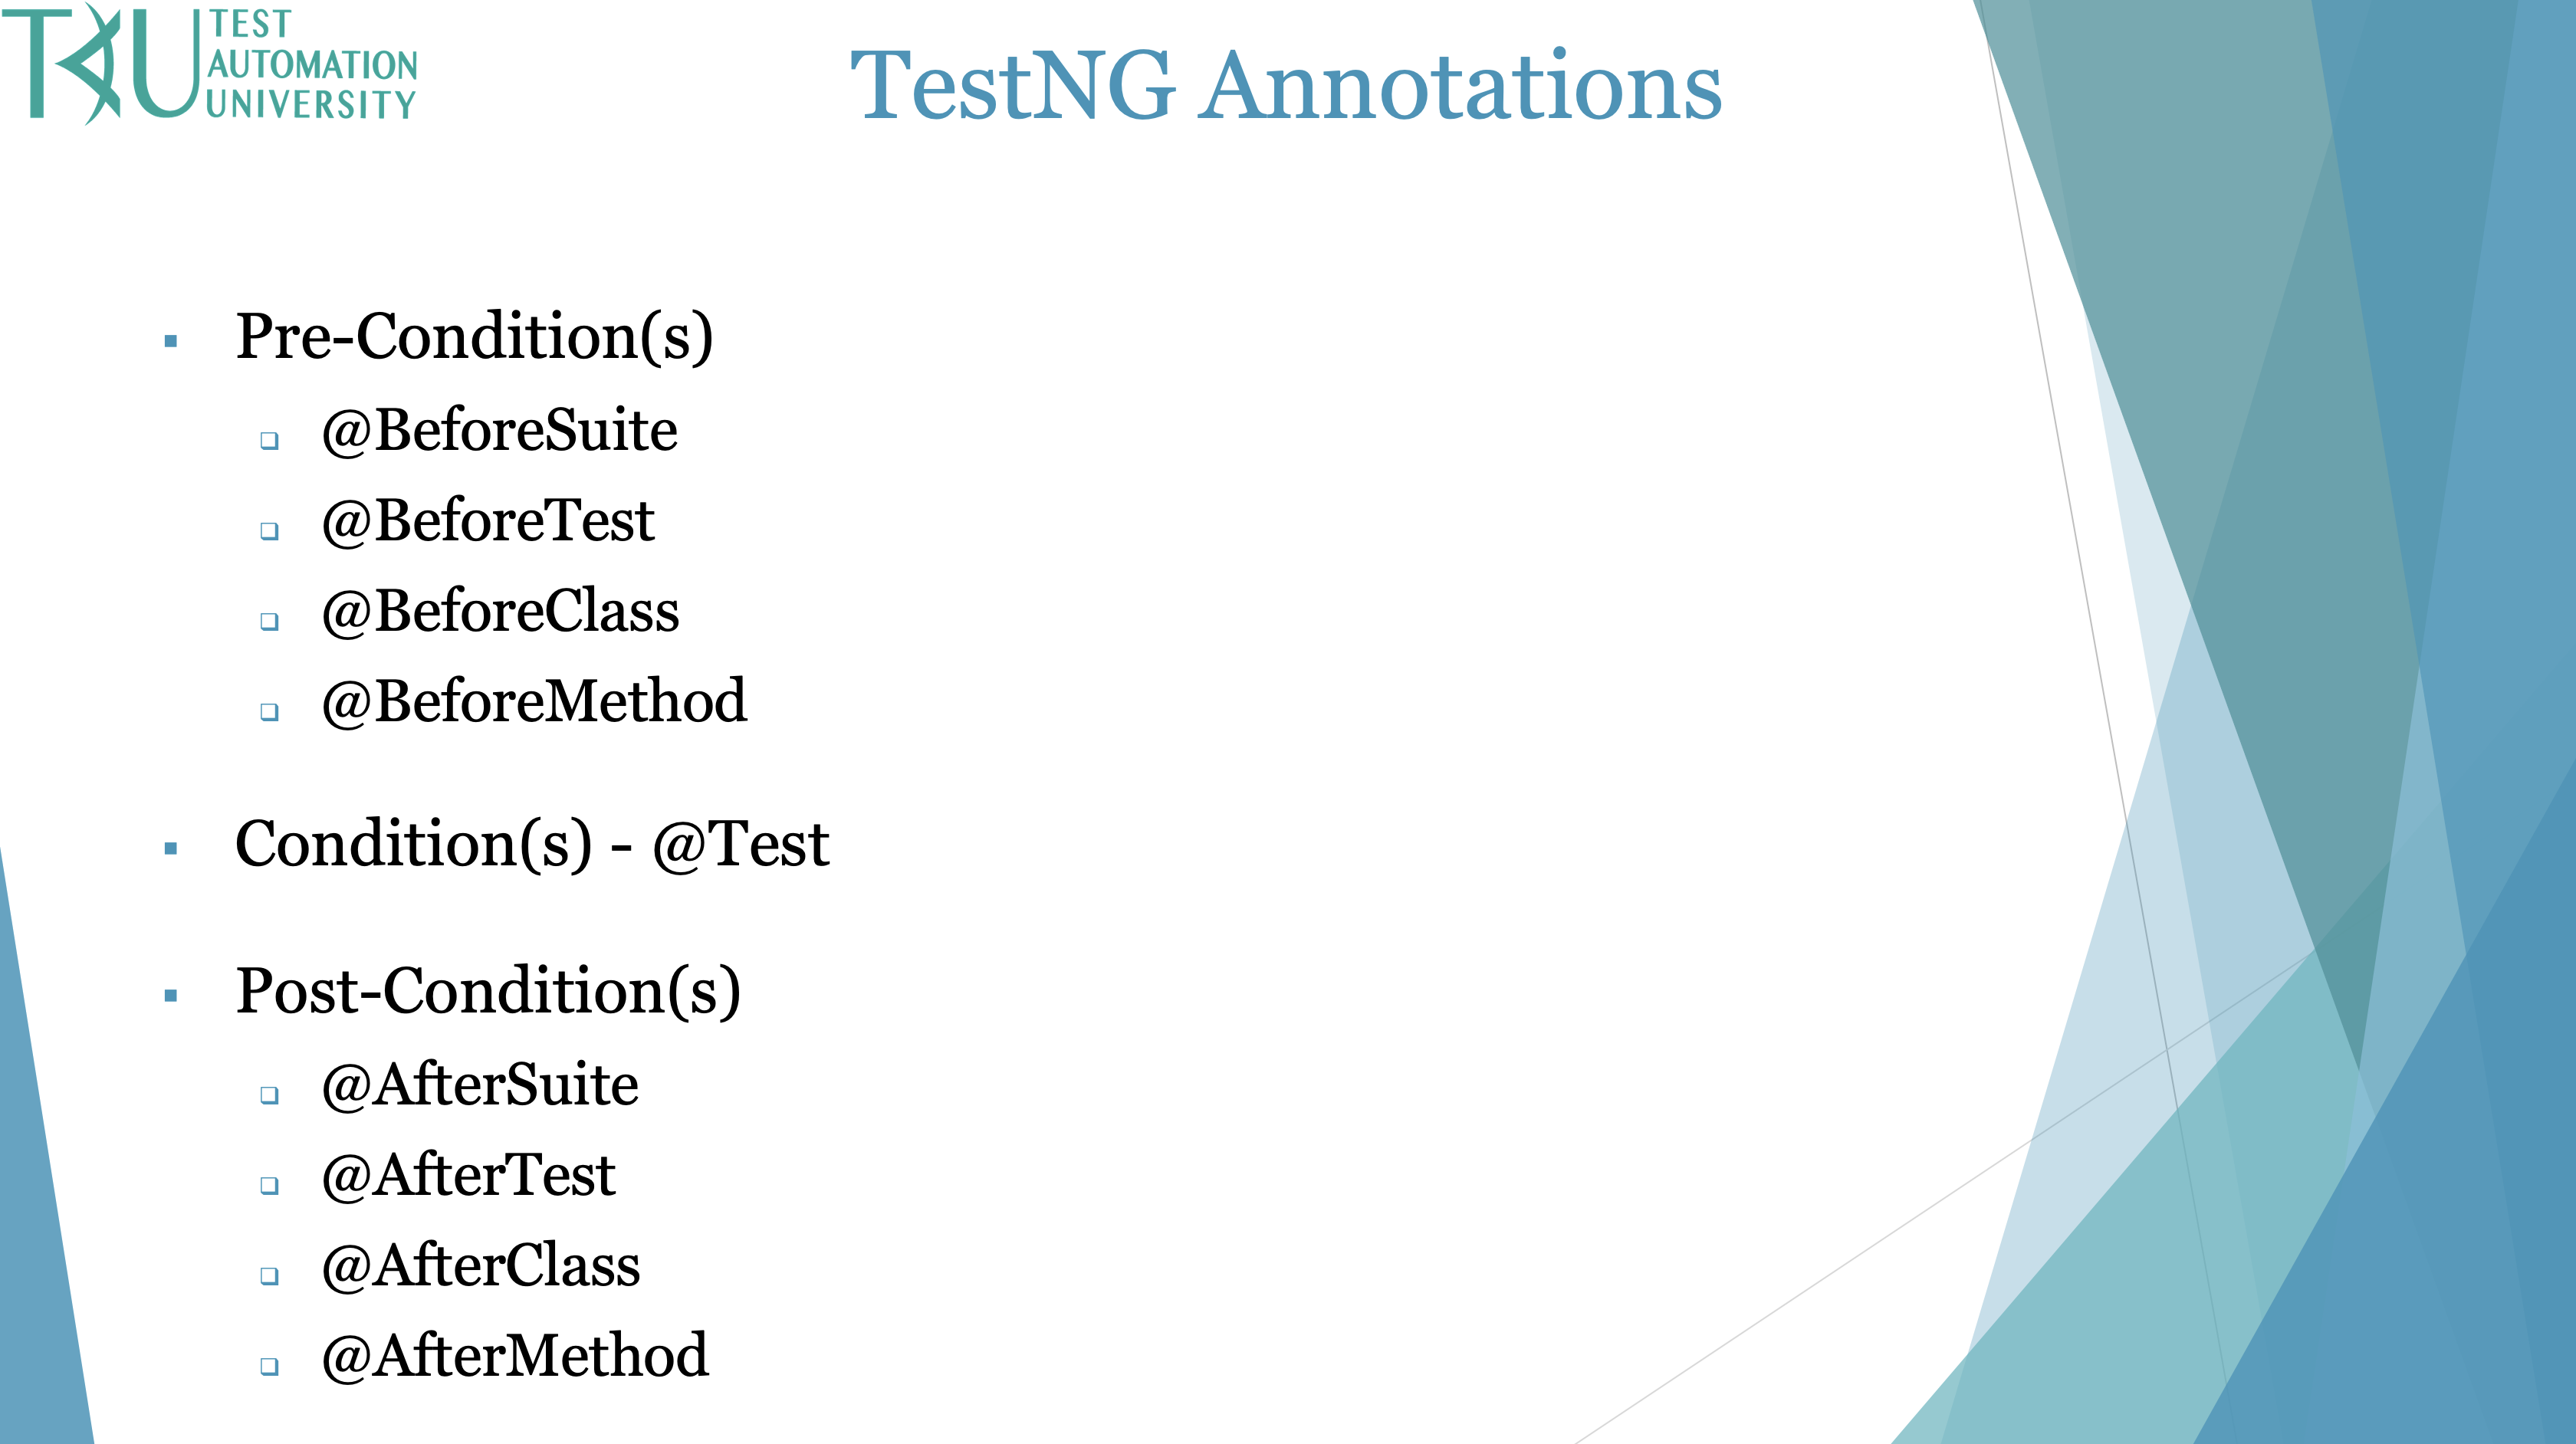 TestNG annotations